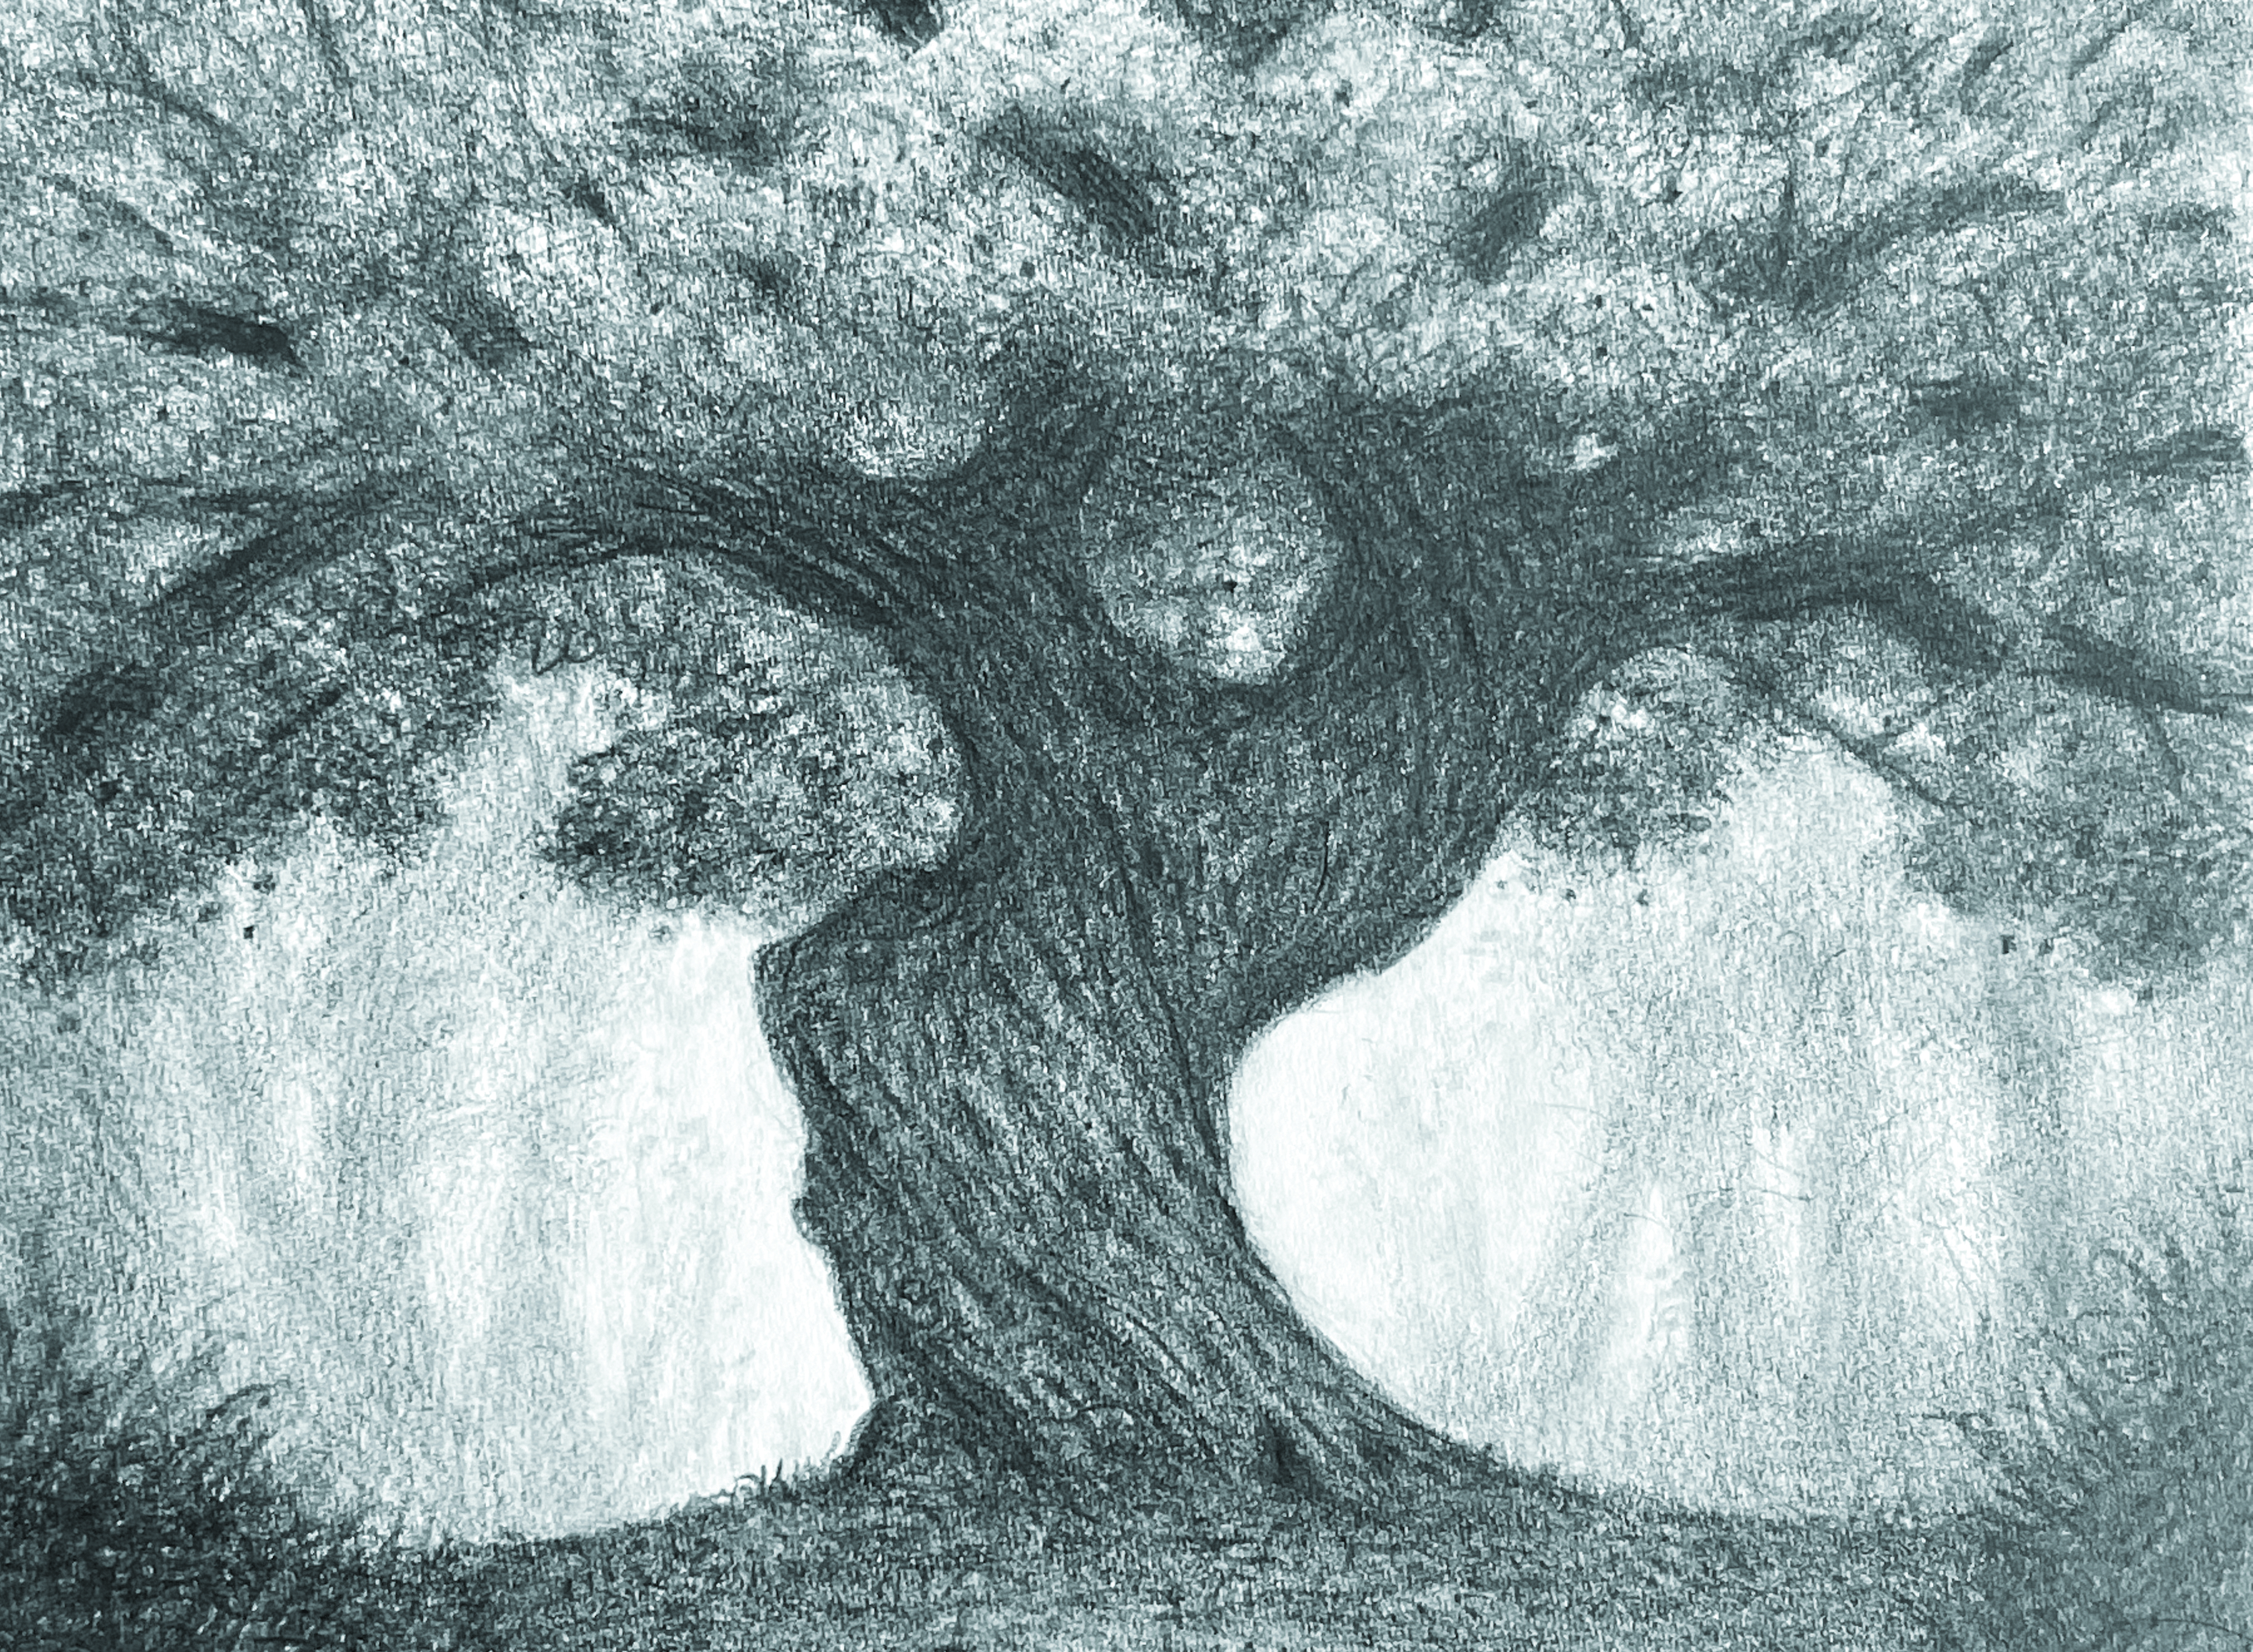 Selznick’s drawing of Mama tree, a character in Big Tree